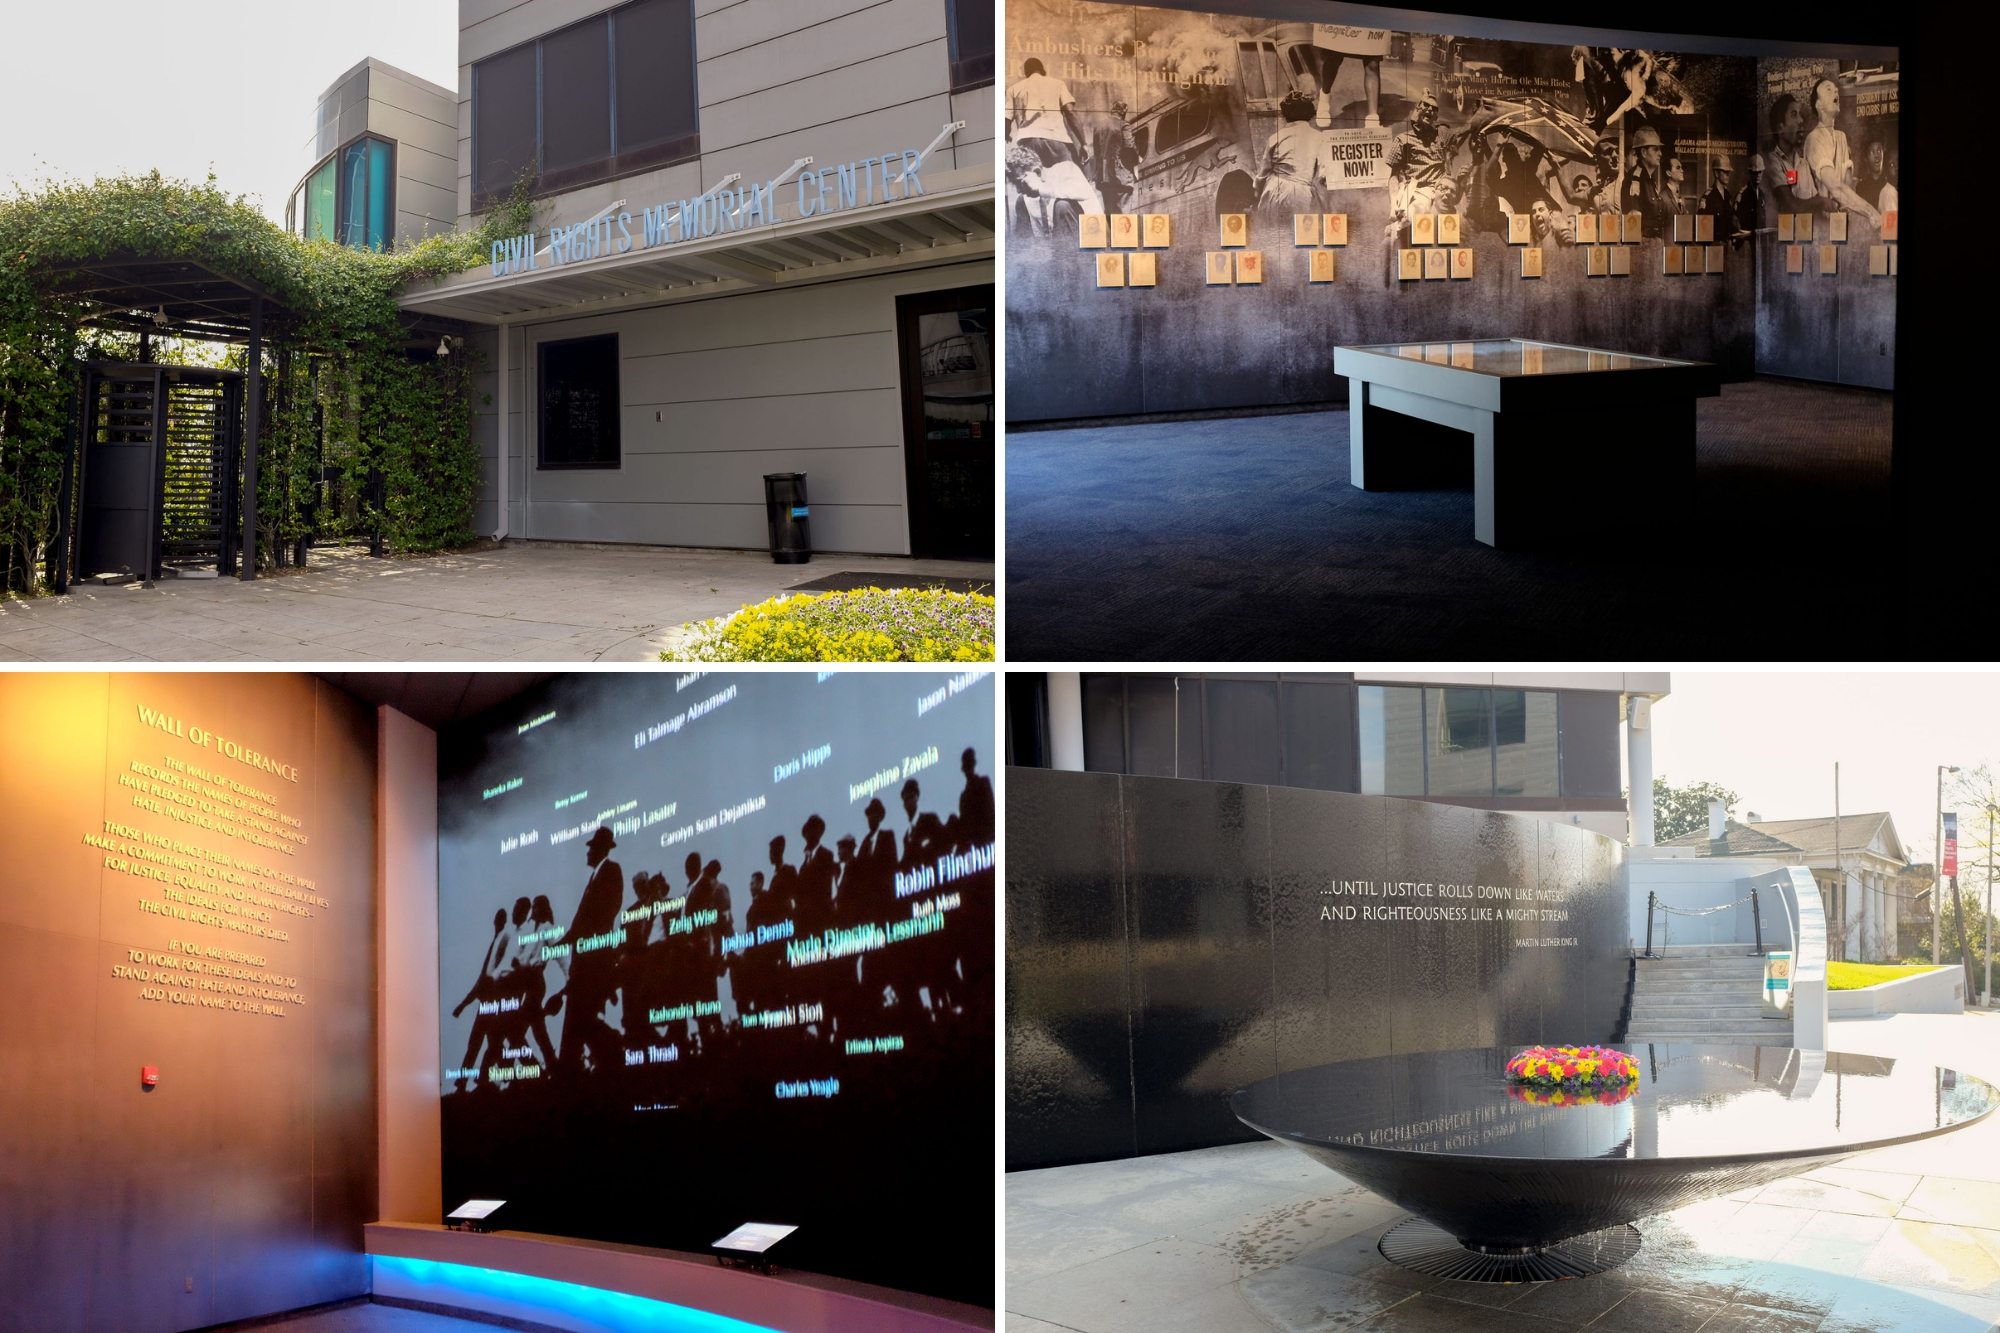 collage of exterior and interior of civil rights memorial